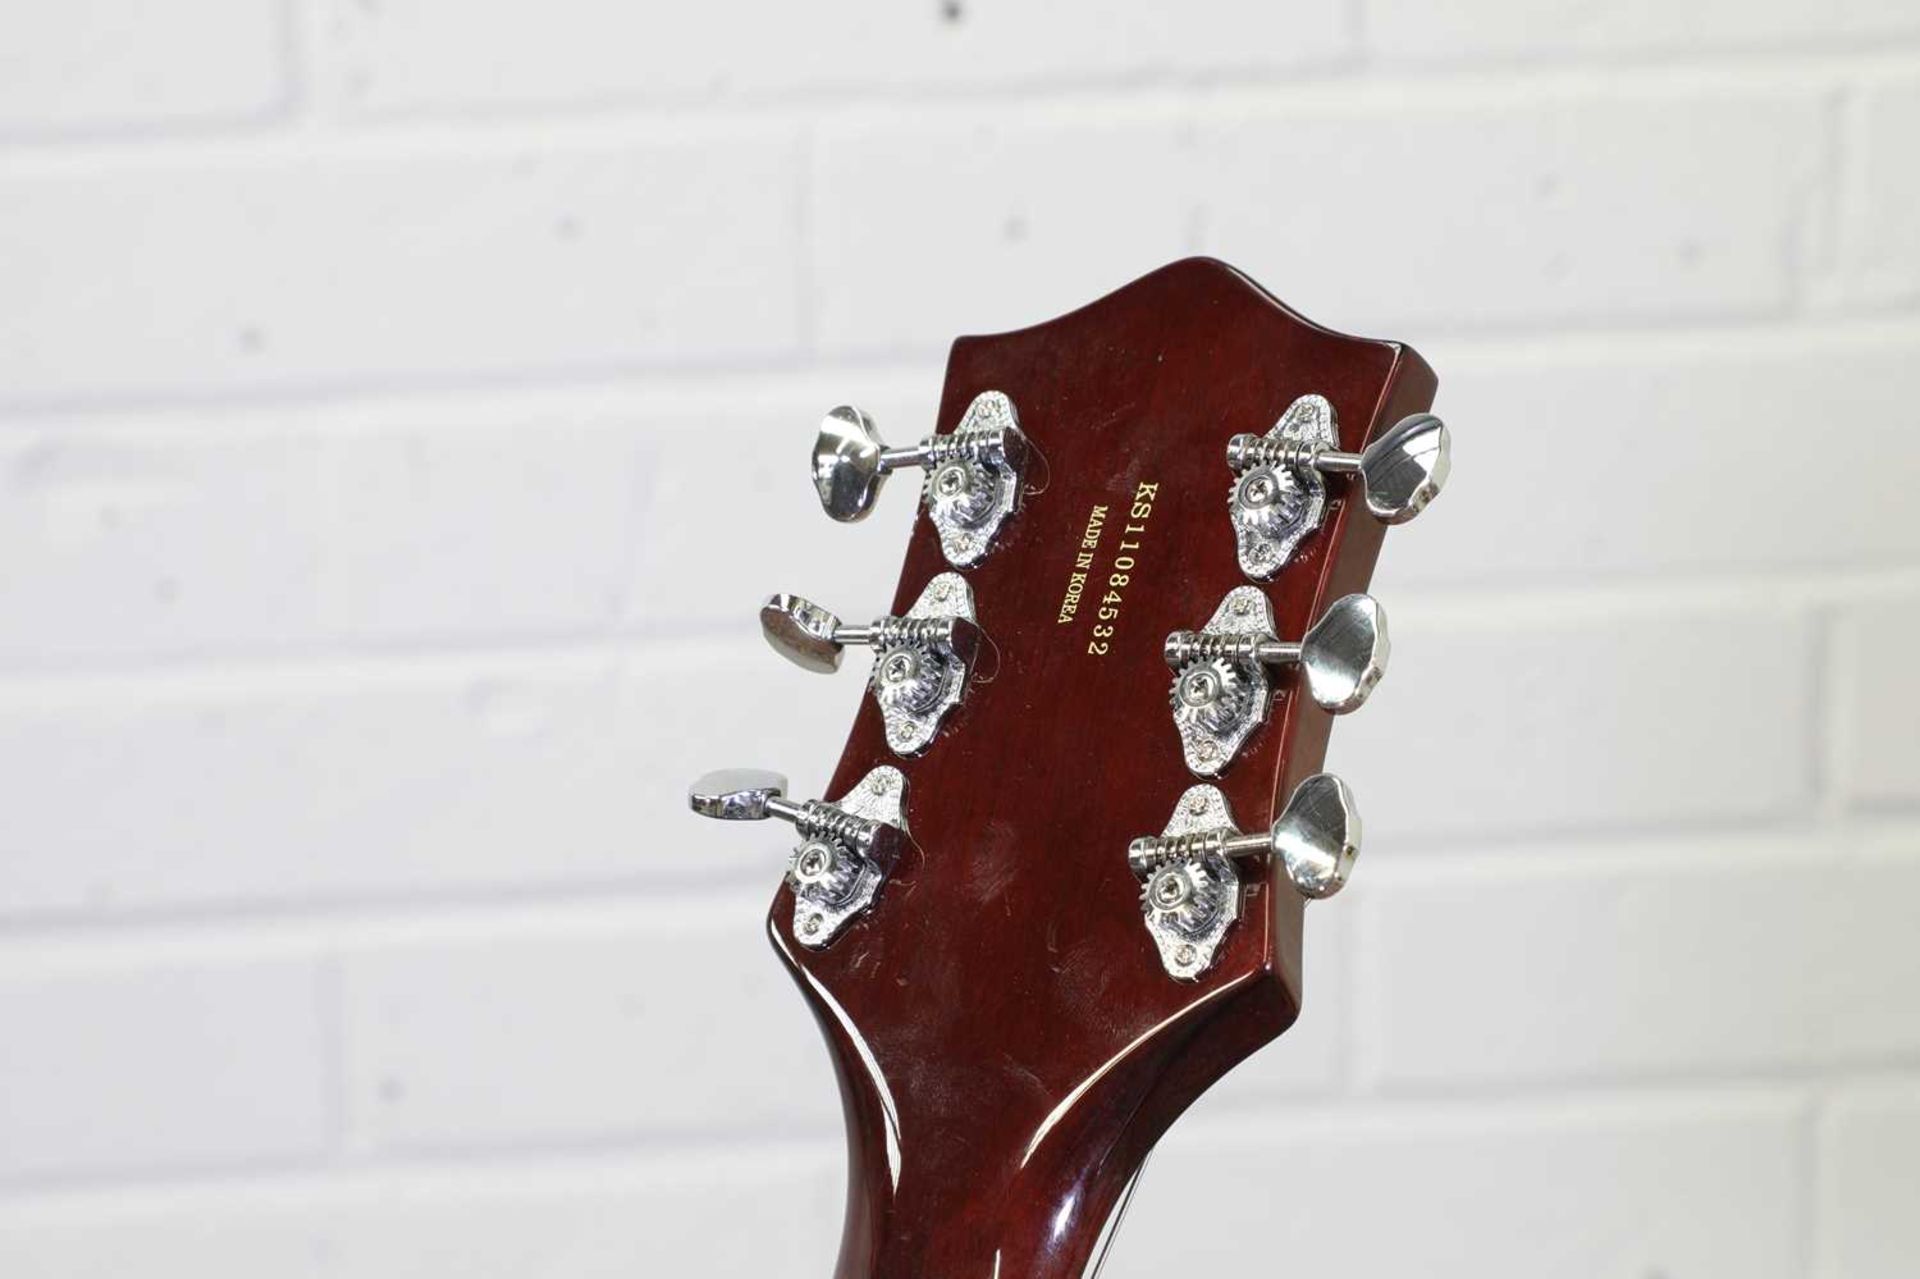 A Gretsch Electromatic semi-hollow electric guitar, - Image 8 of 8